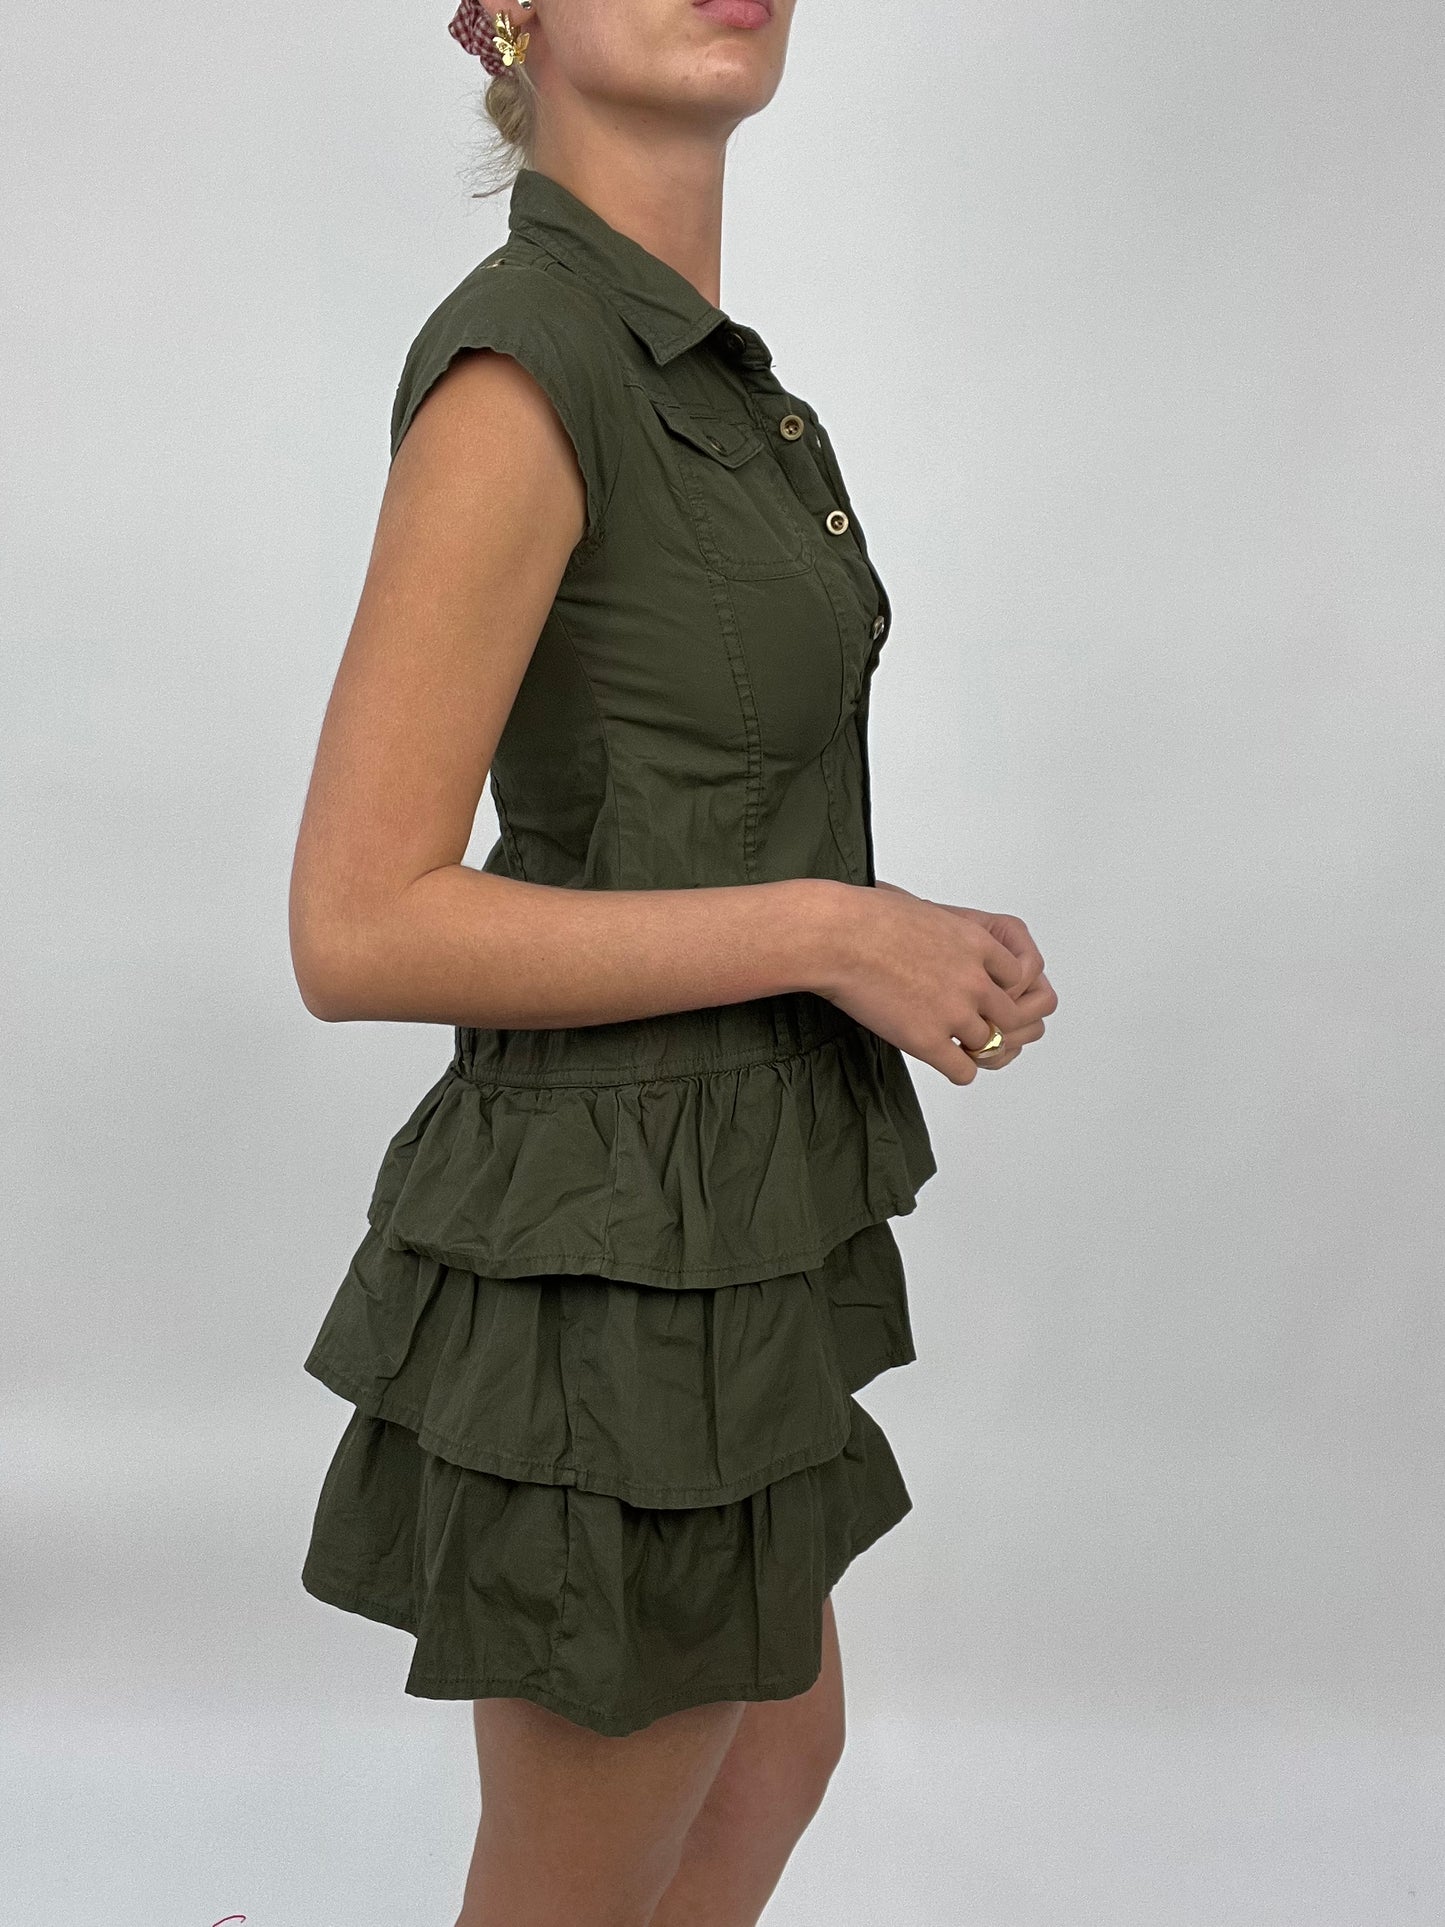 💻 COCONUT GIRL DROP | small khaki dress with buttons and ruffles